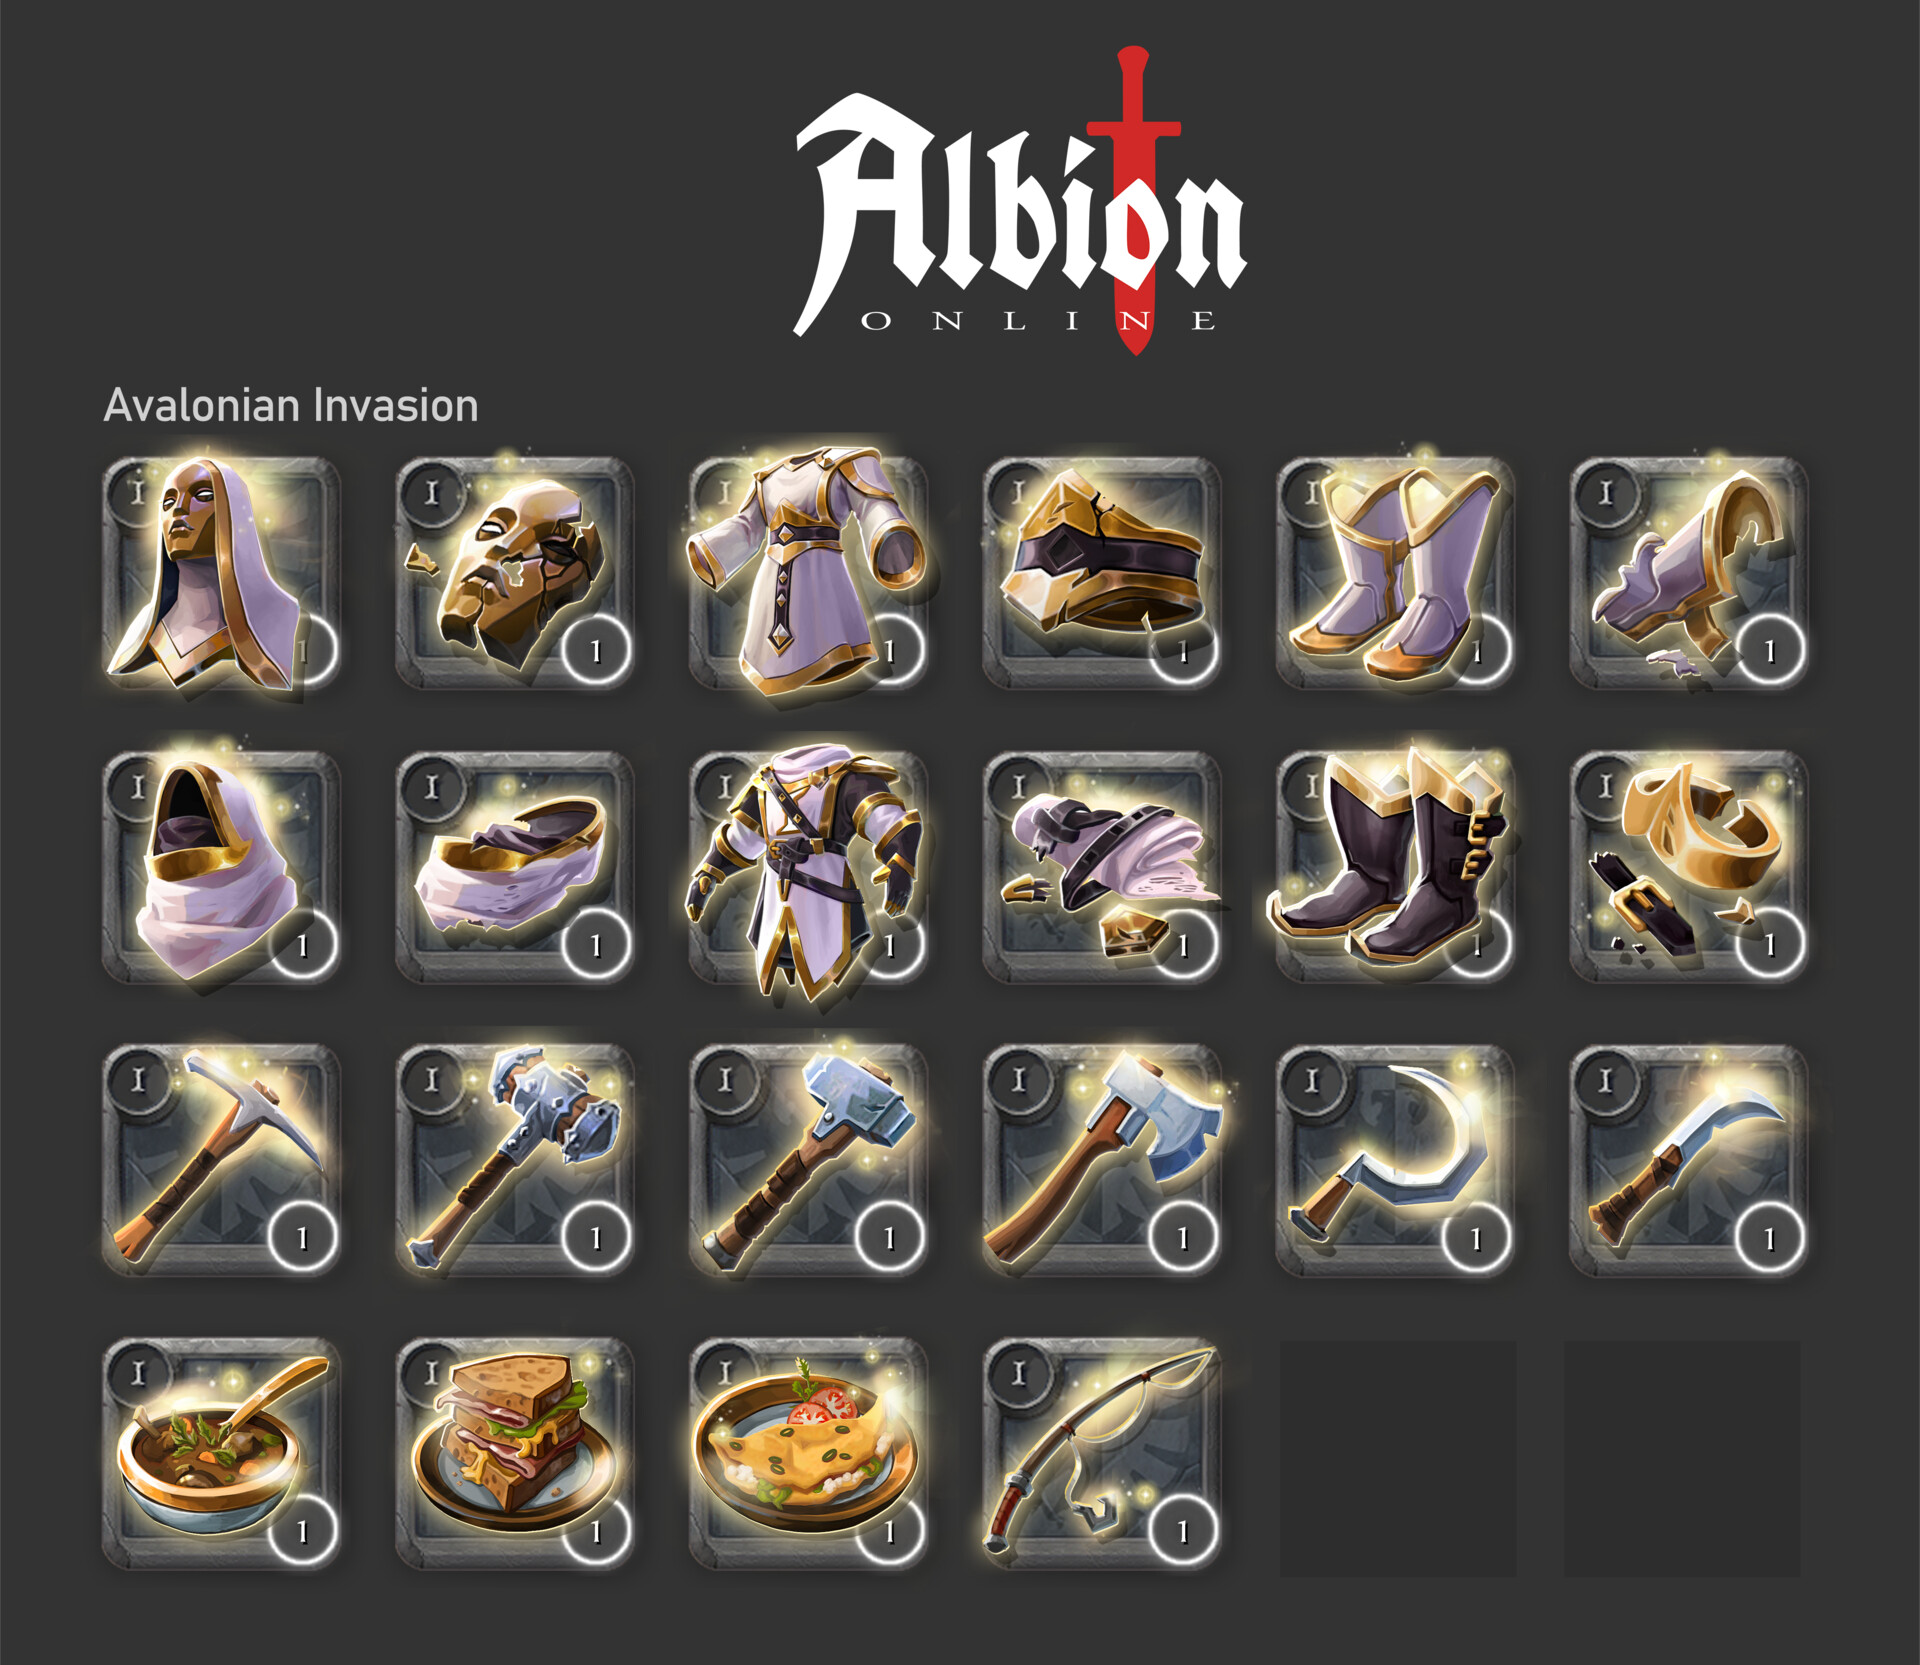 Albion Online - Icon by Blagoicons on DeviantArt